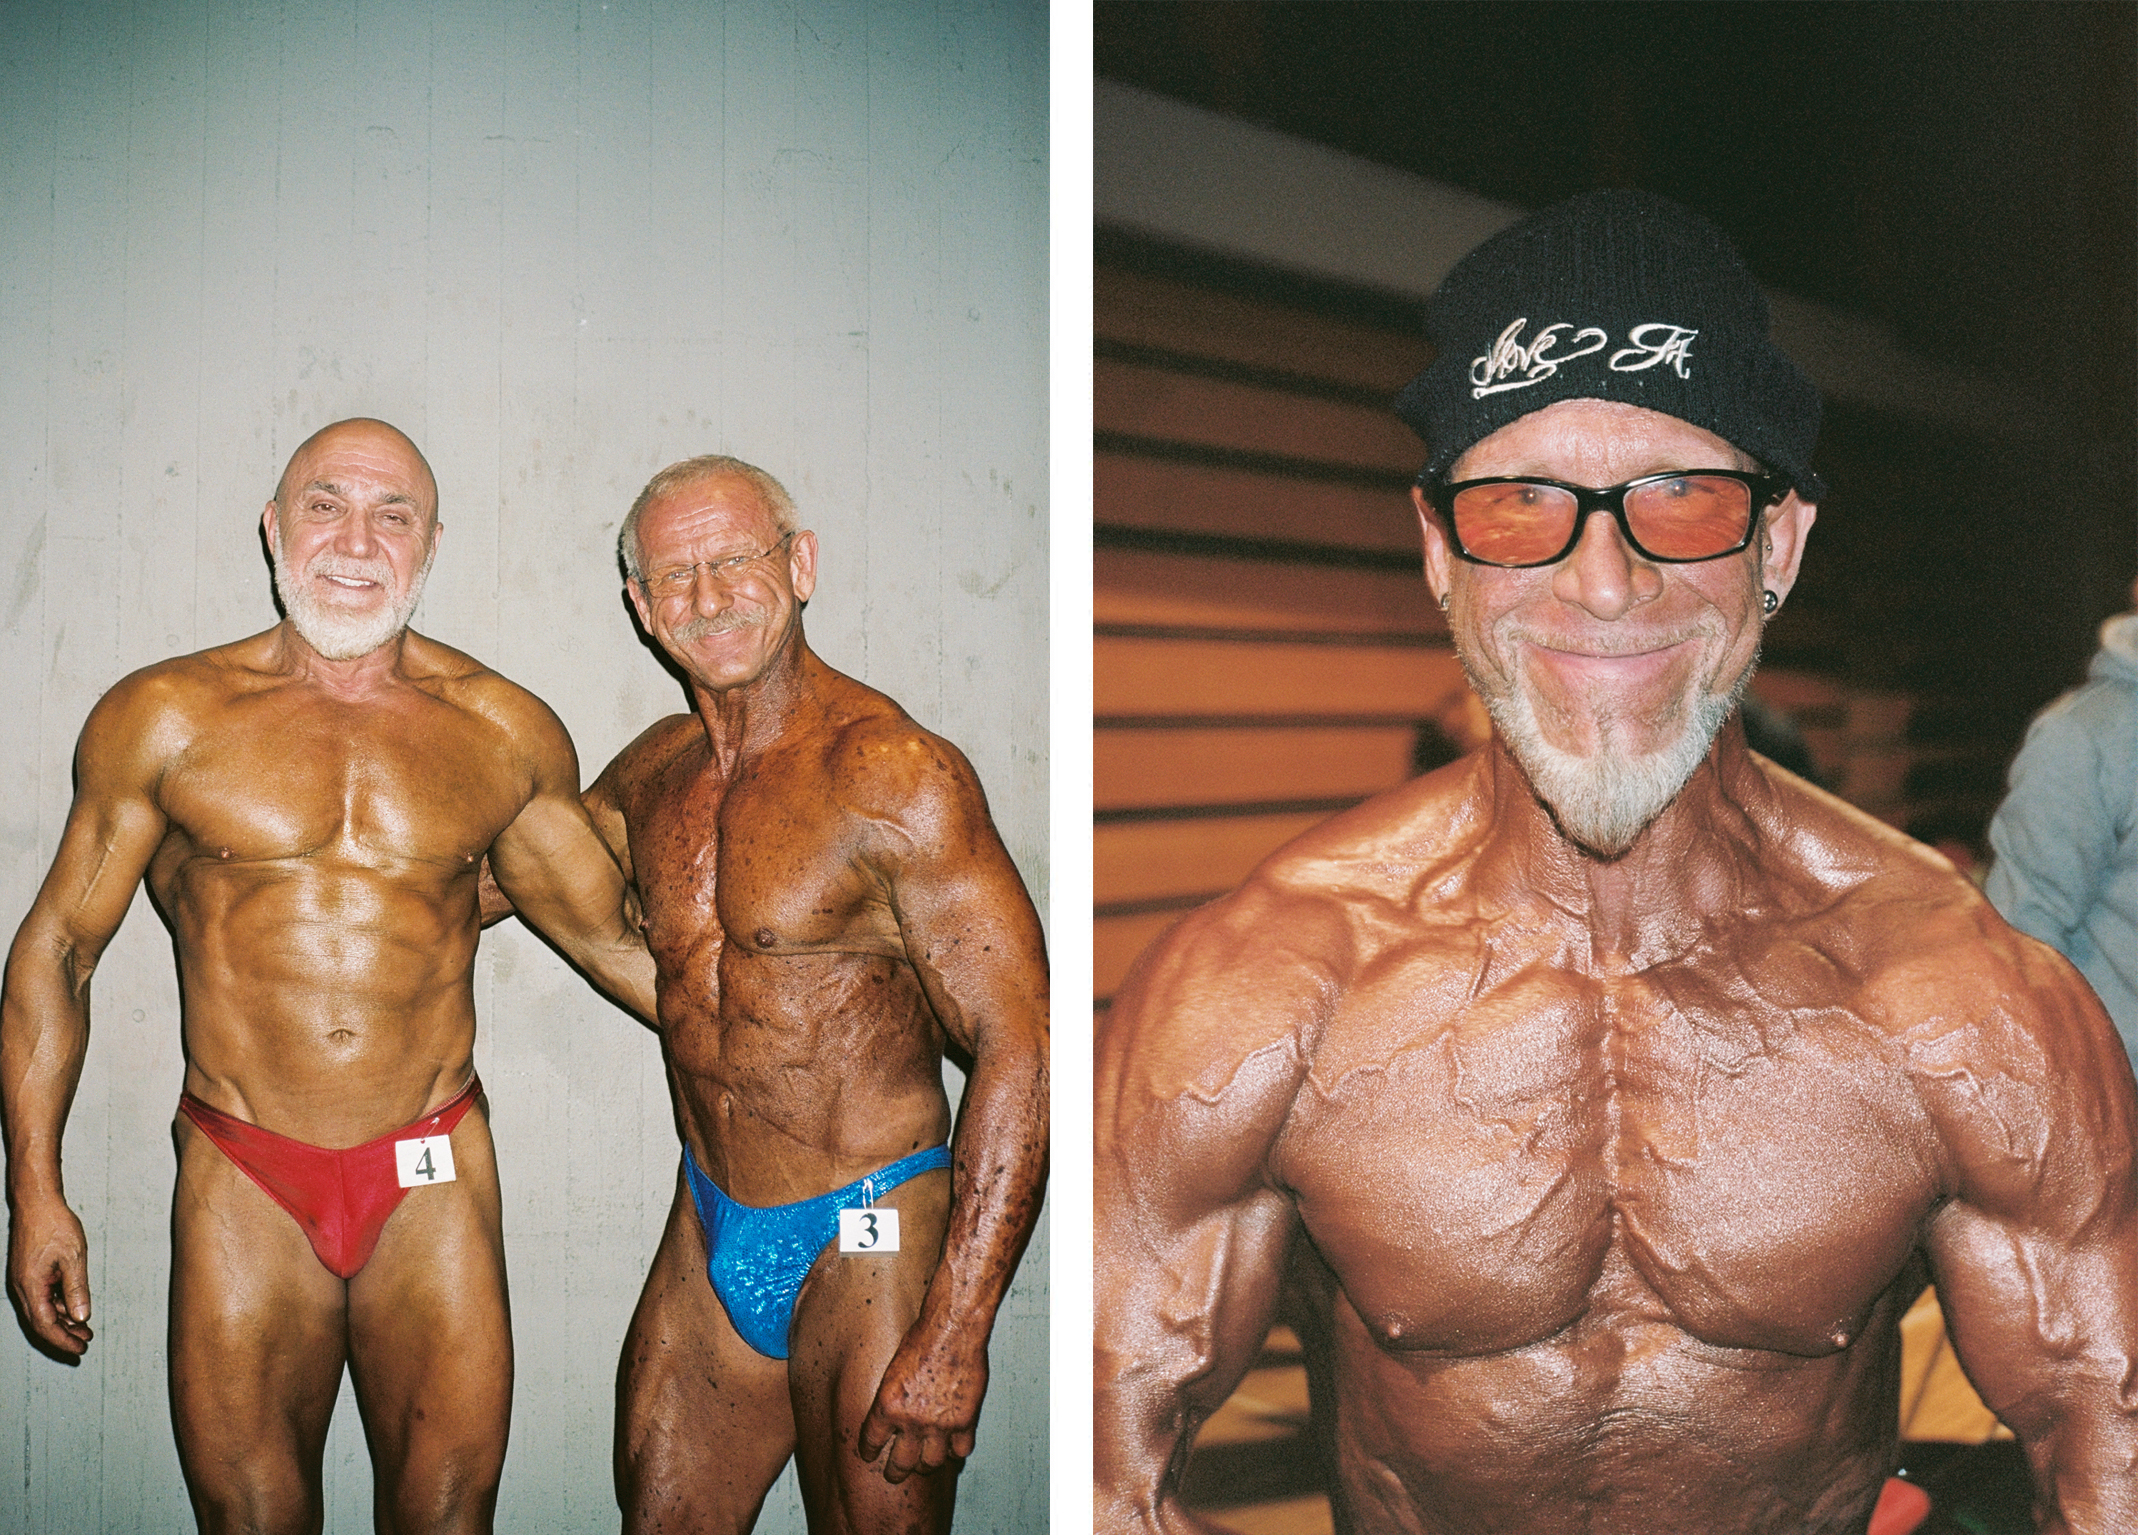 Nikolas-Petros Androbik, bodybuilding, photography - Composite image of three muscular and tanned older men.